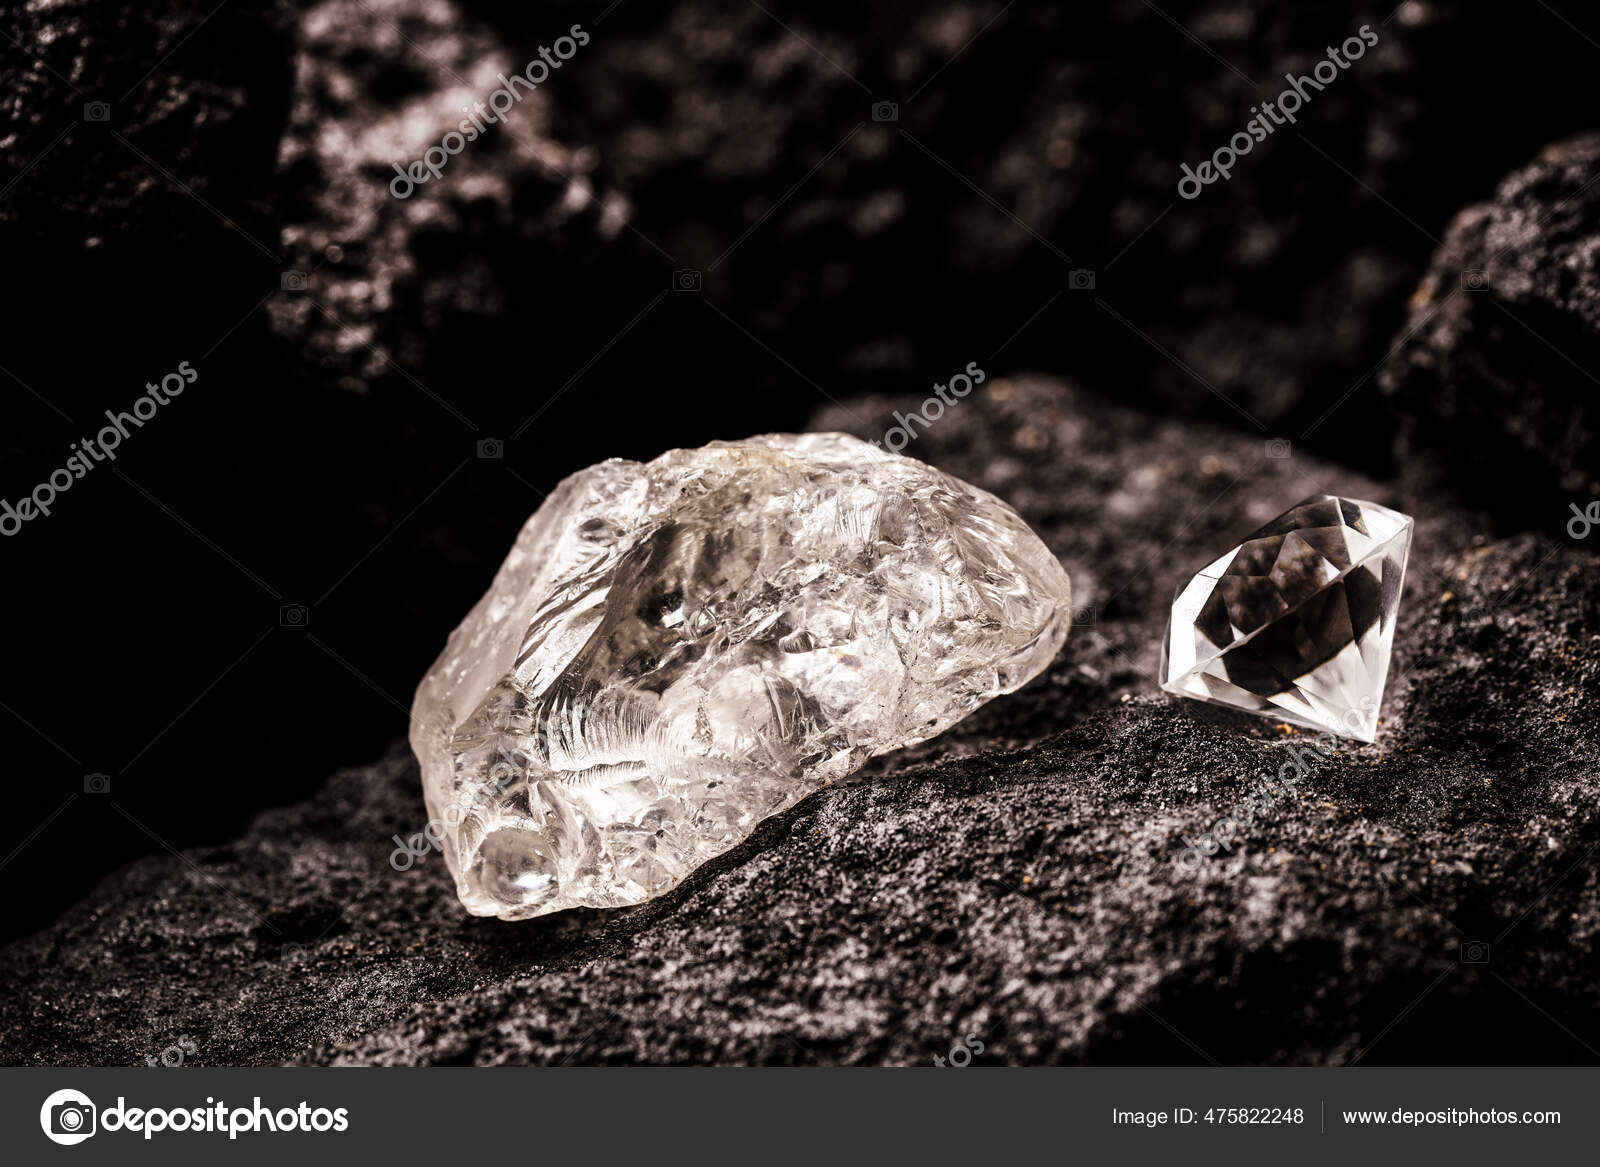 Rough Diamond Precious Stone In Mines Concept Of Mining And